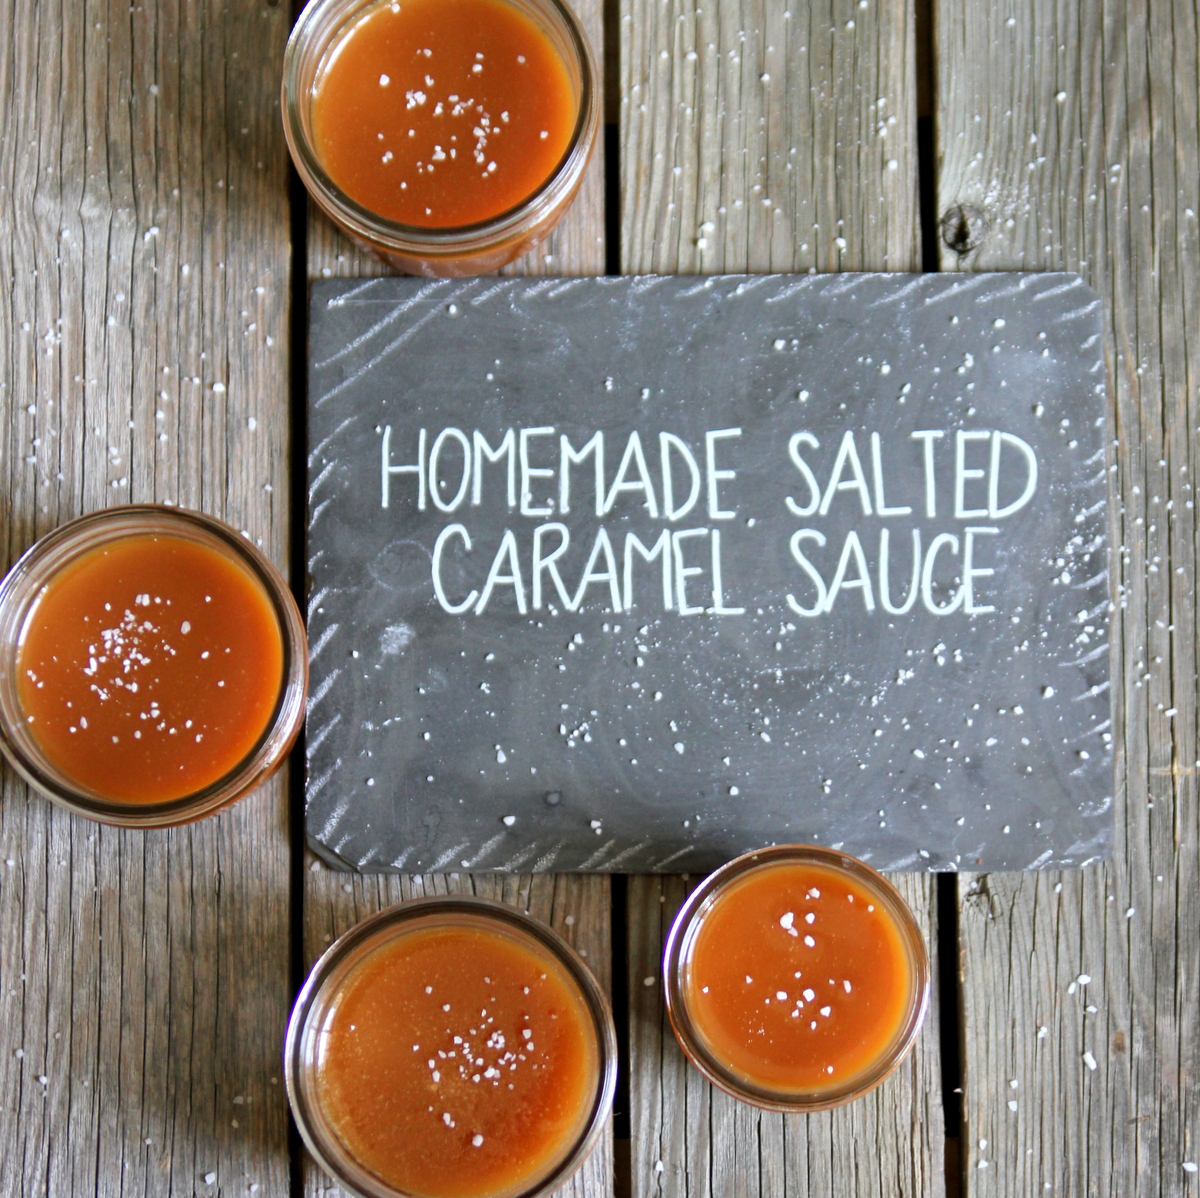 homemade salted caramel sauce- serve on ice cream, cheesecake, fruit (or eat it with a spoon!)